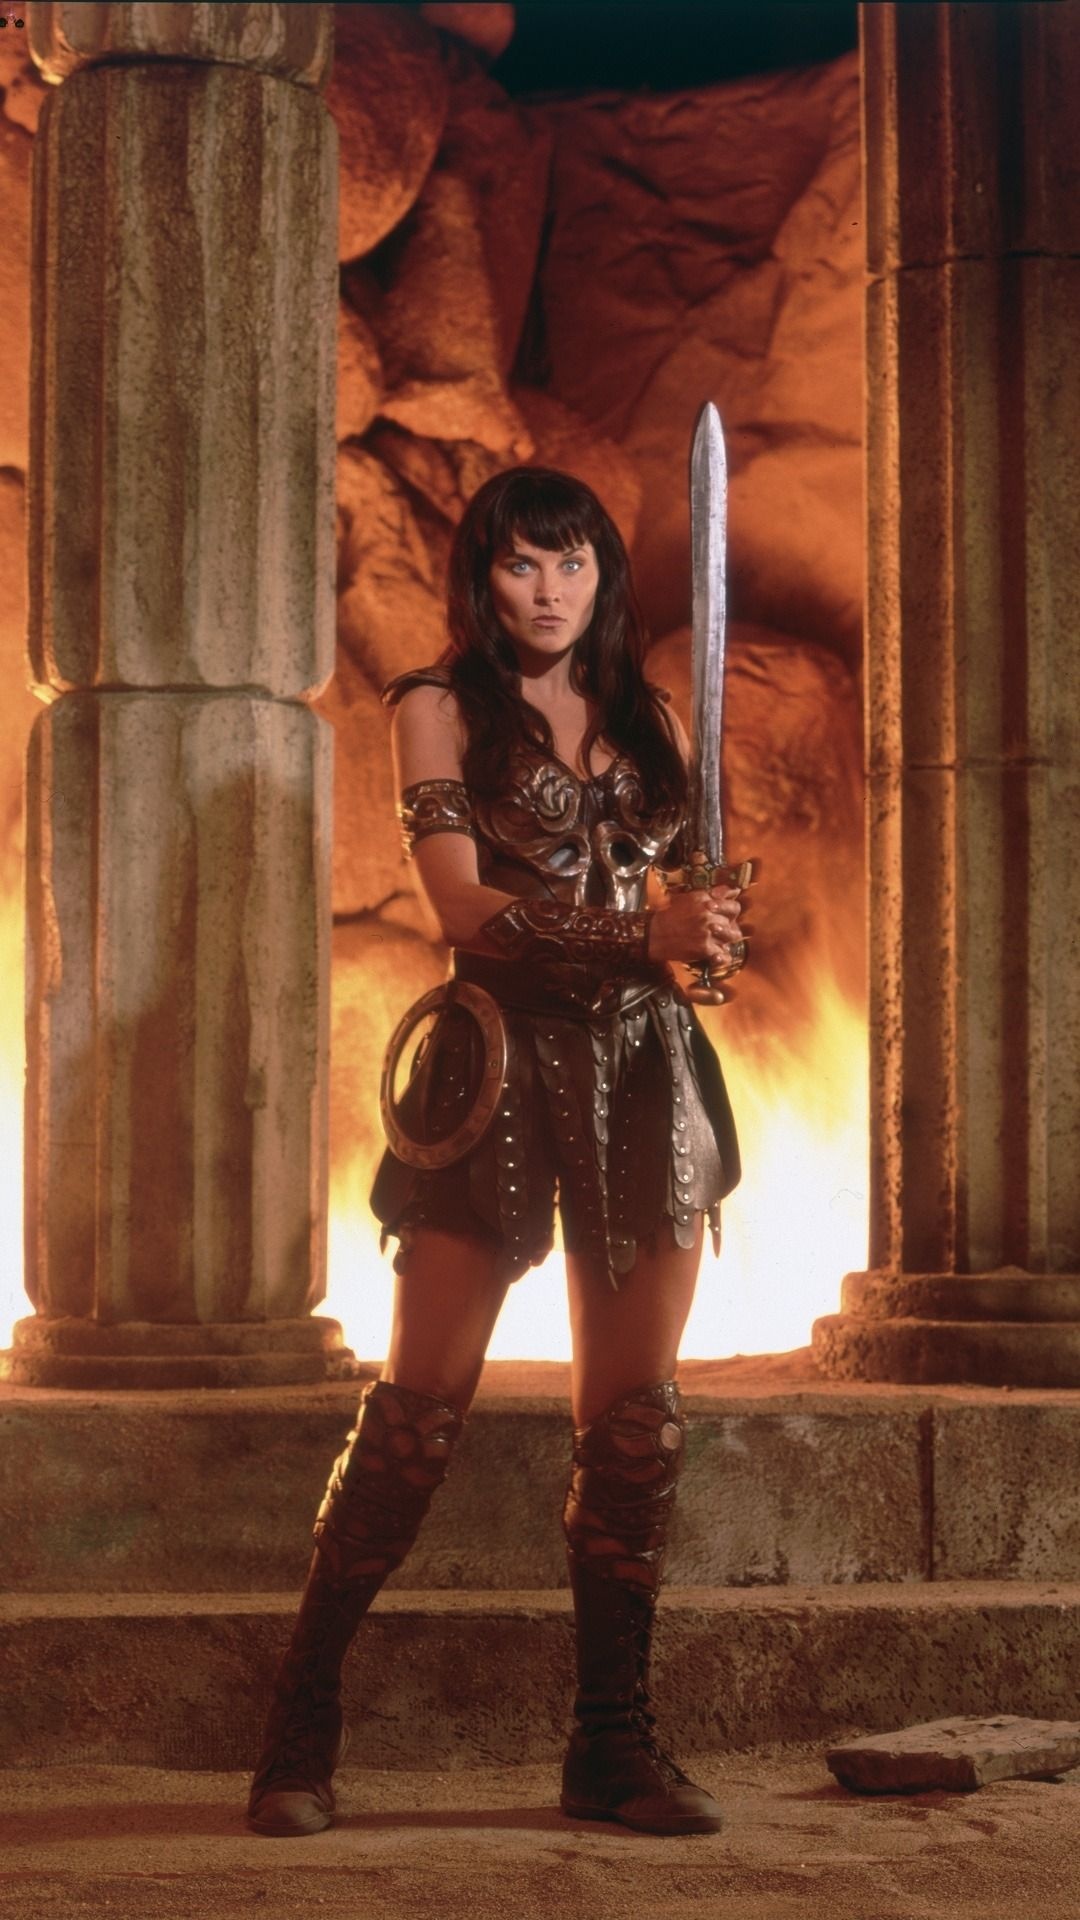 Xena: Warrior Princess (TV Series): A fictional character played by New Zealand actress Lucy Lawless. 1080x1920 Full HD Background.